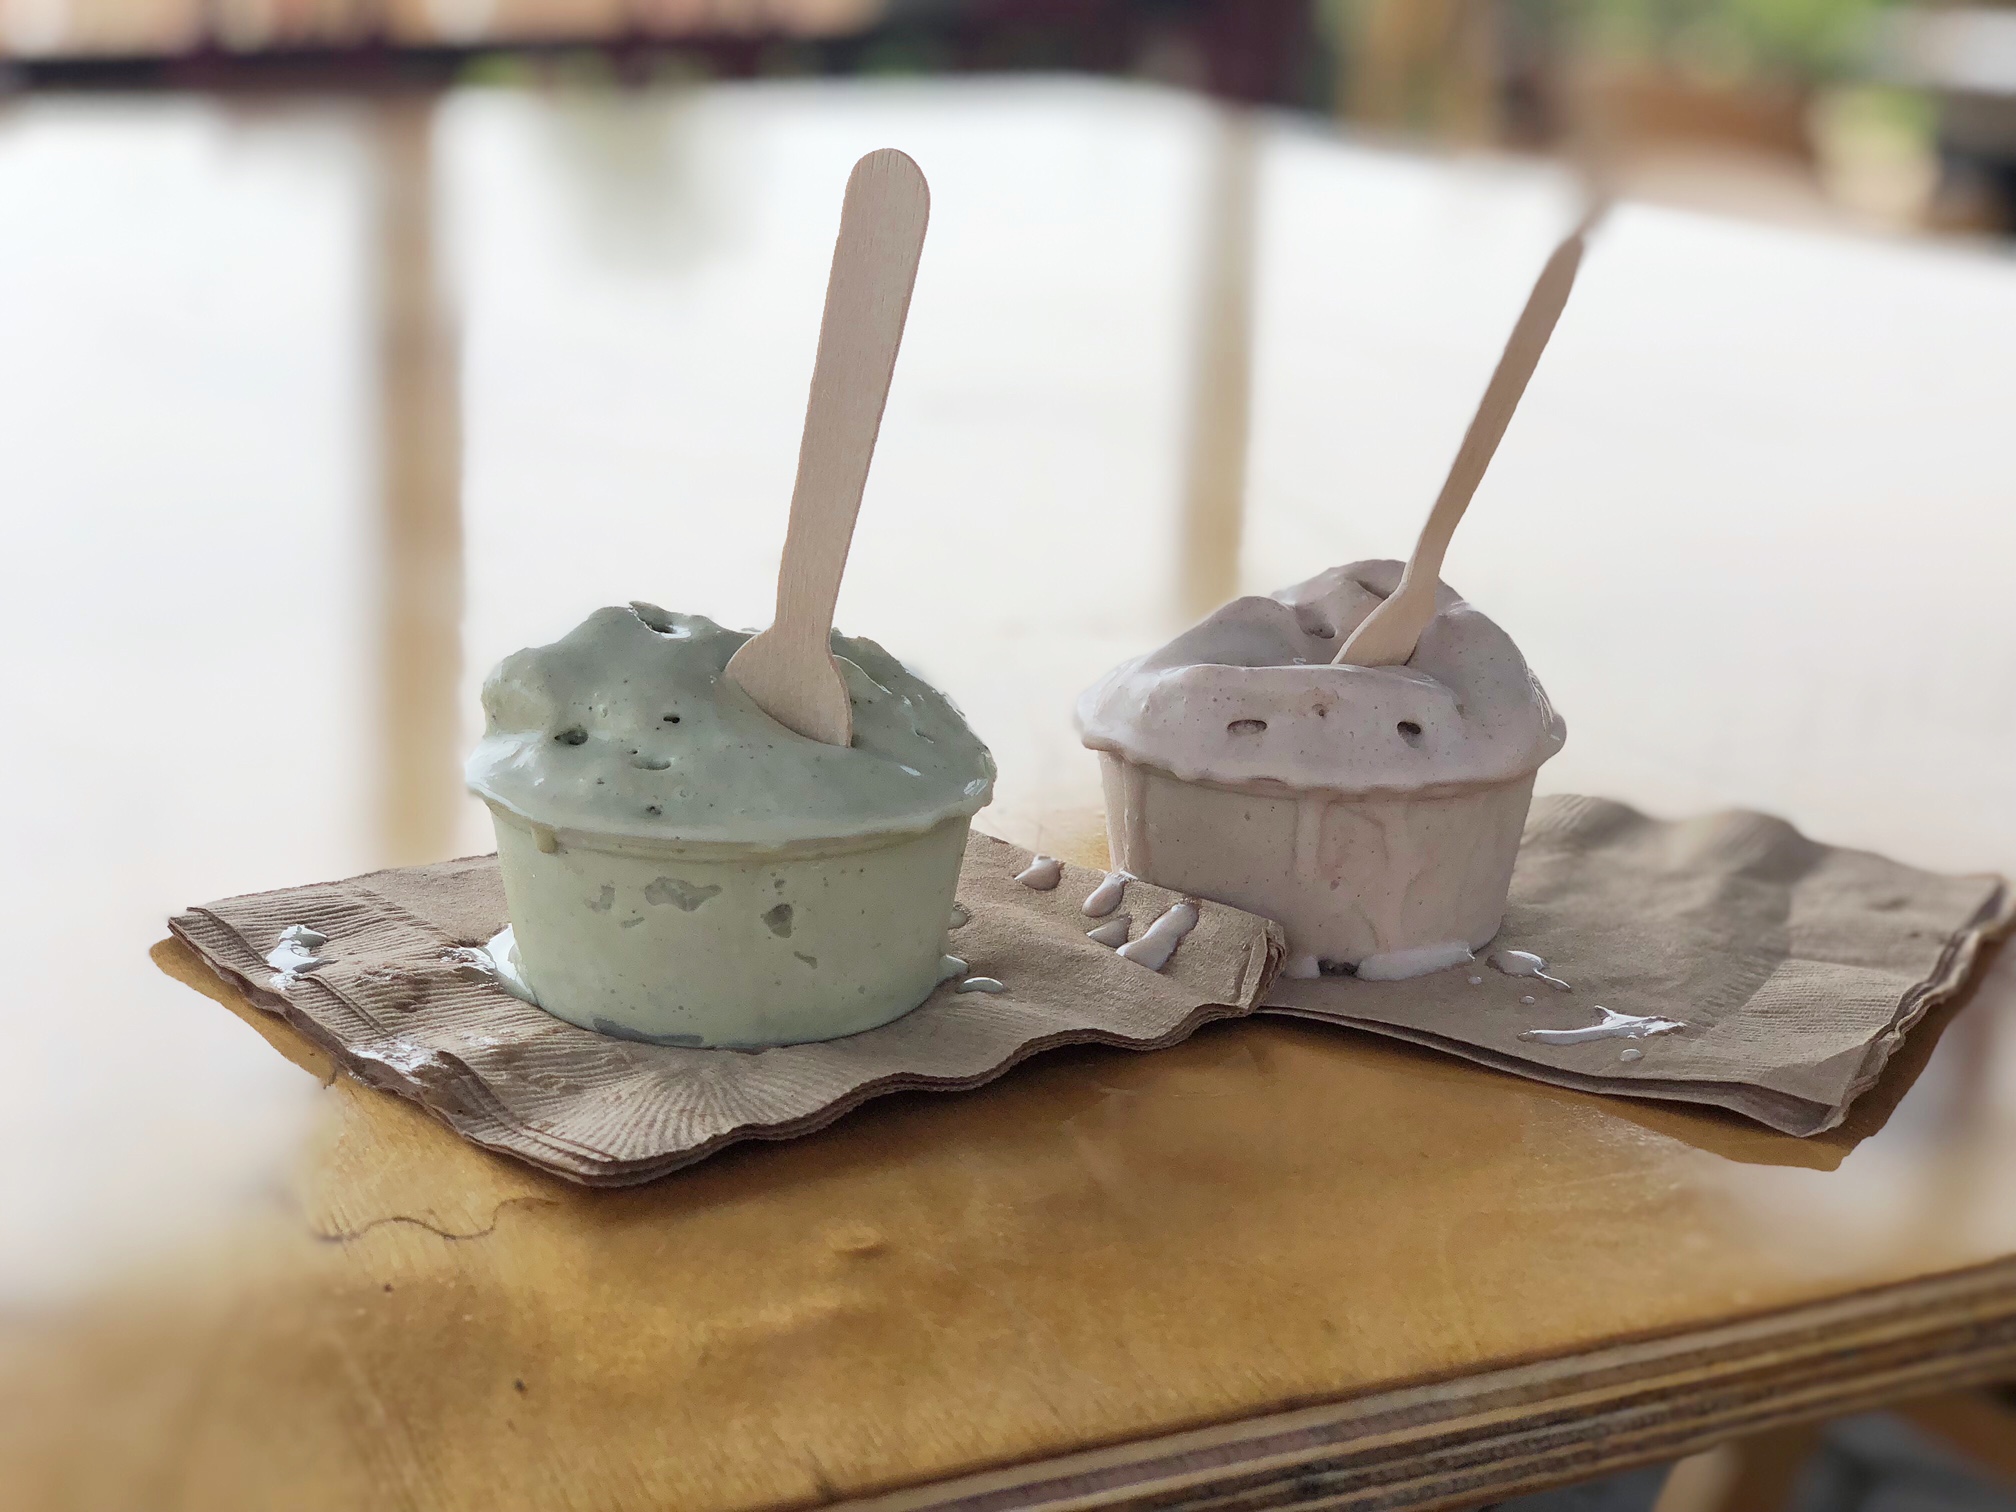 Two small cups of ice cream sitting on napkins on a wooden table. They each have a spoon sticking out of them.